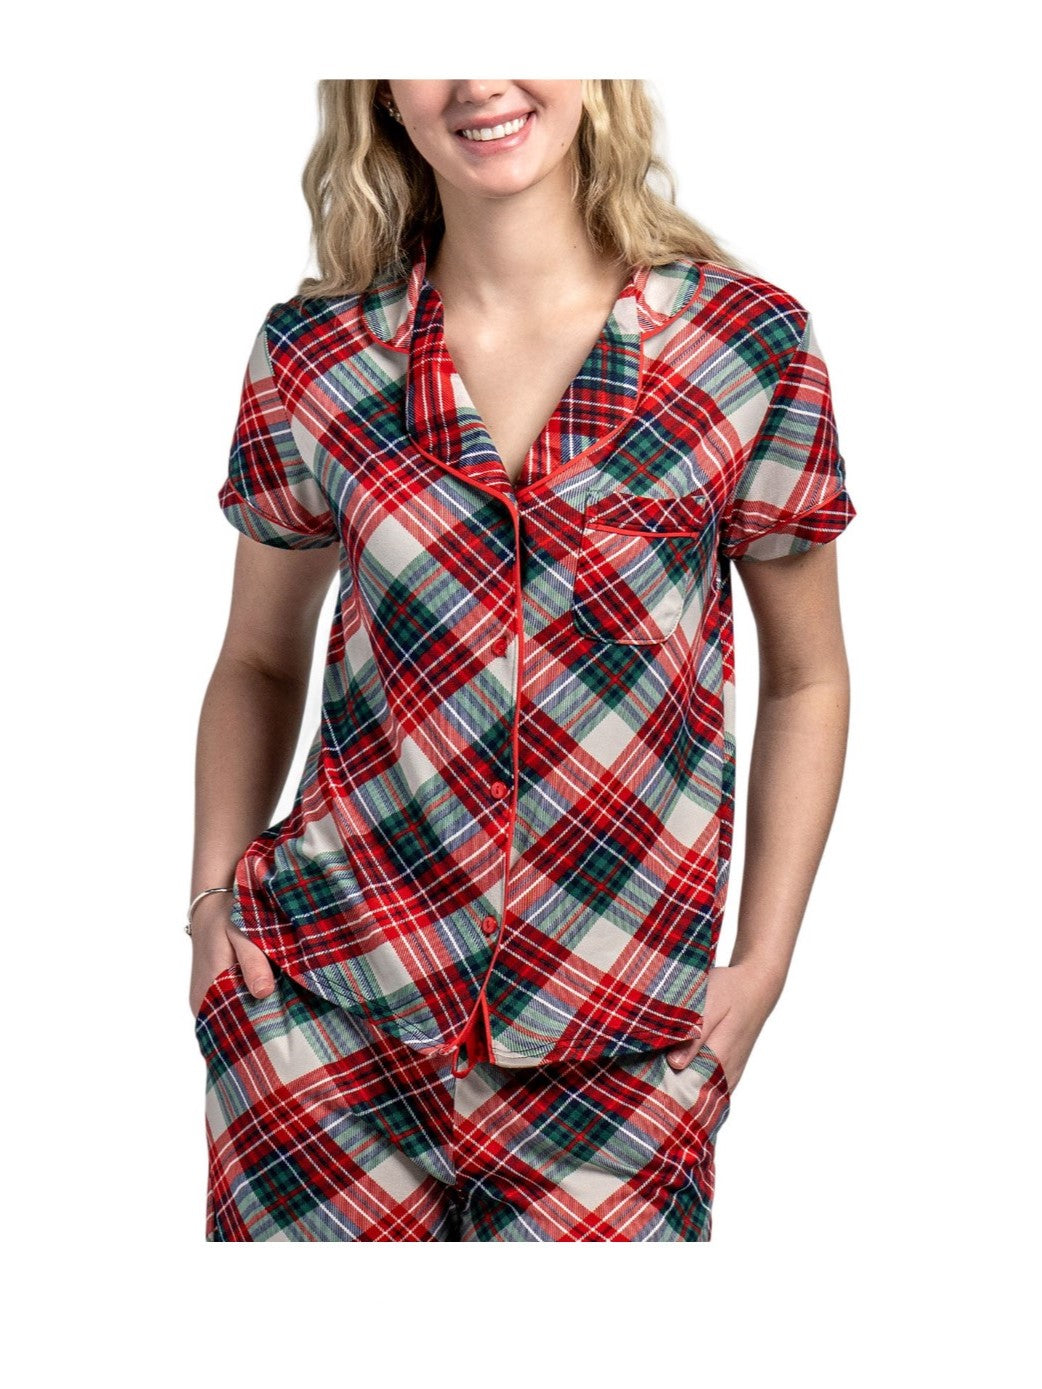 Prancers Plaid Lounge Top, Red/Green